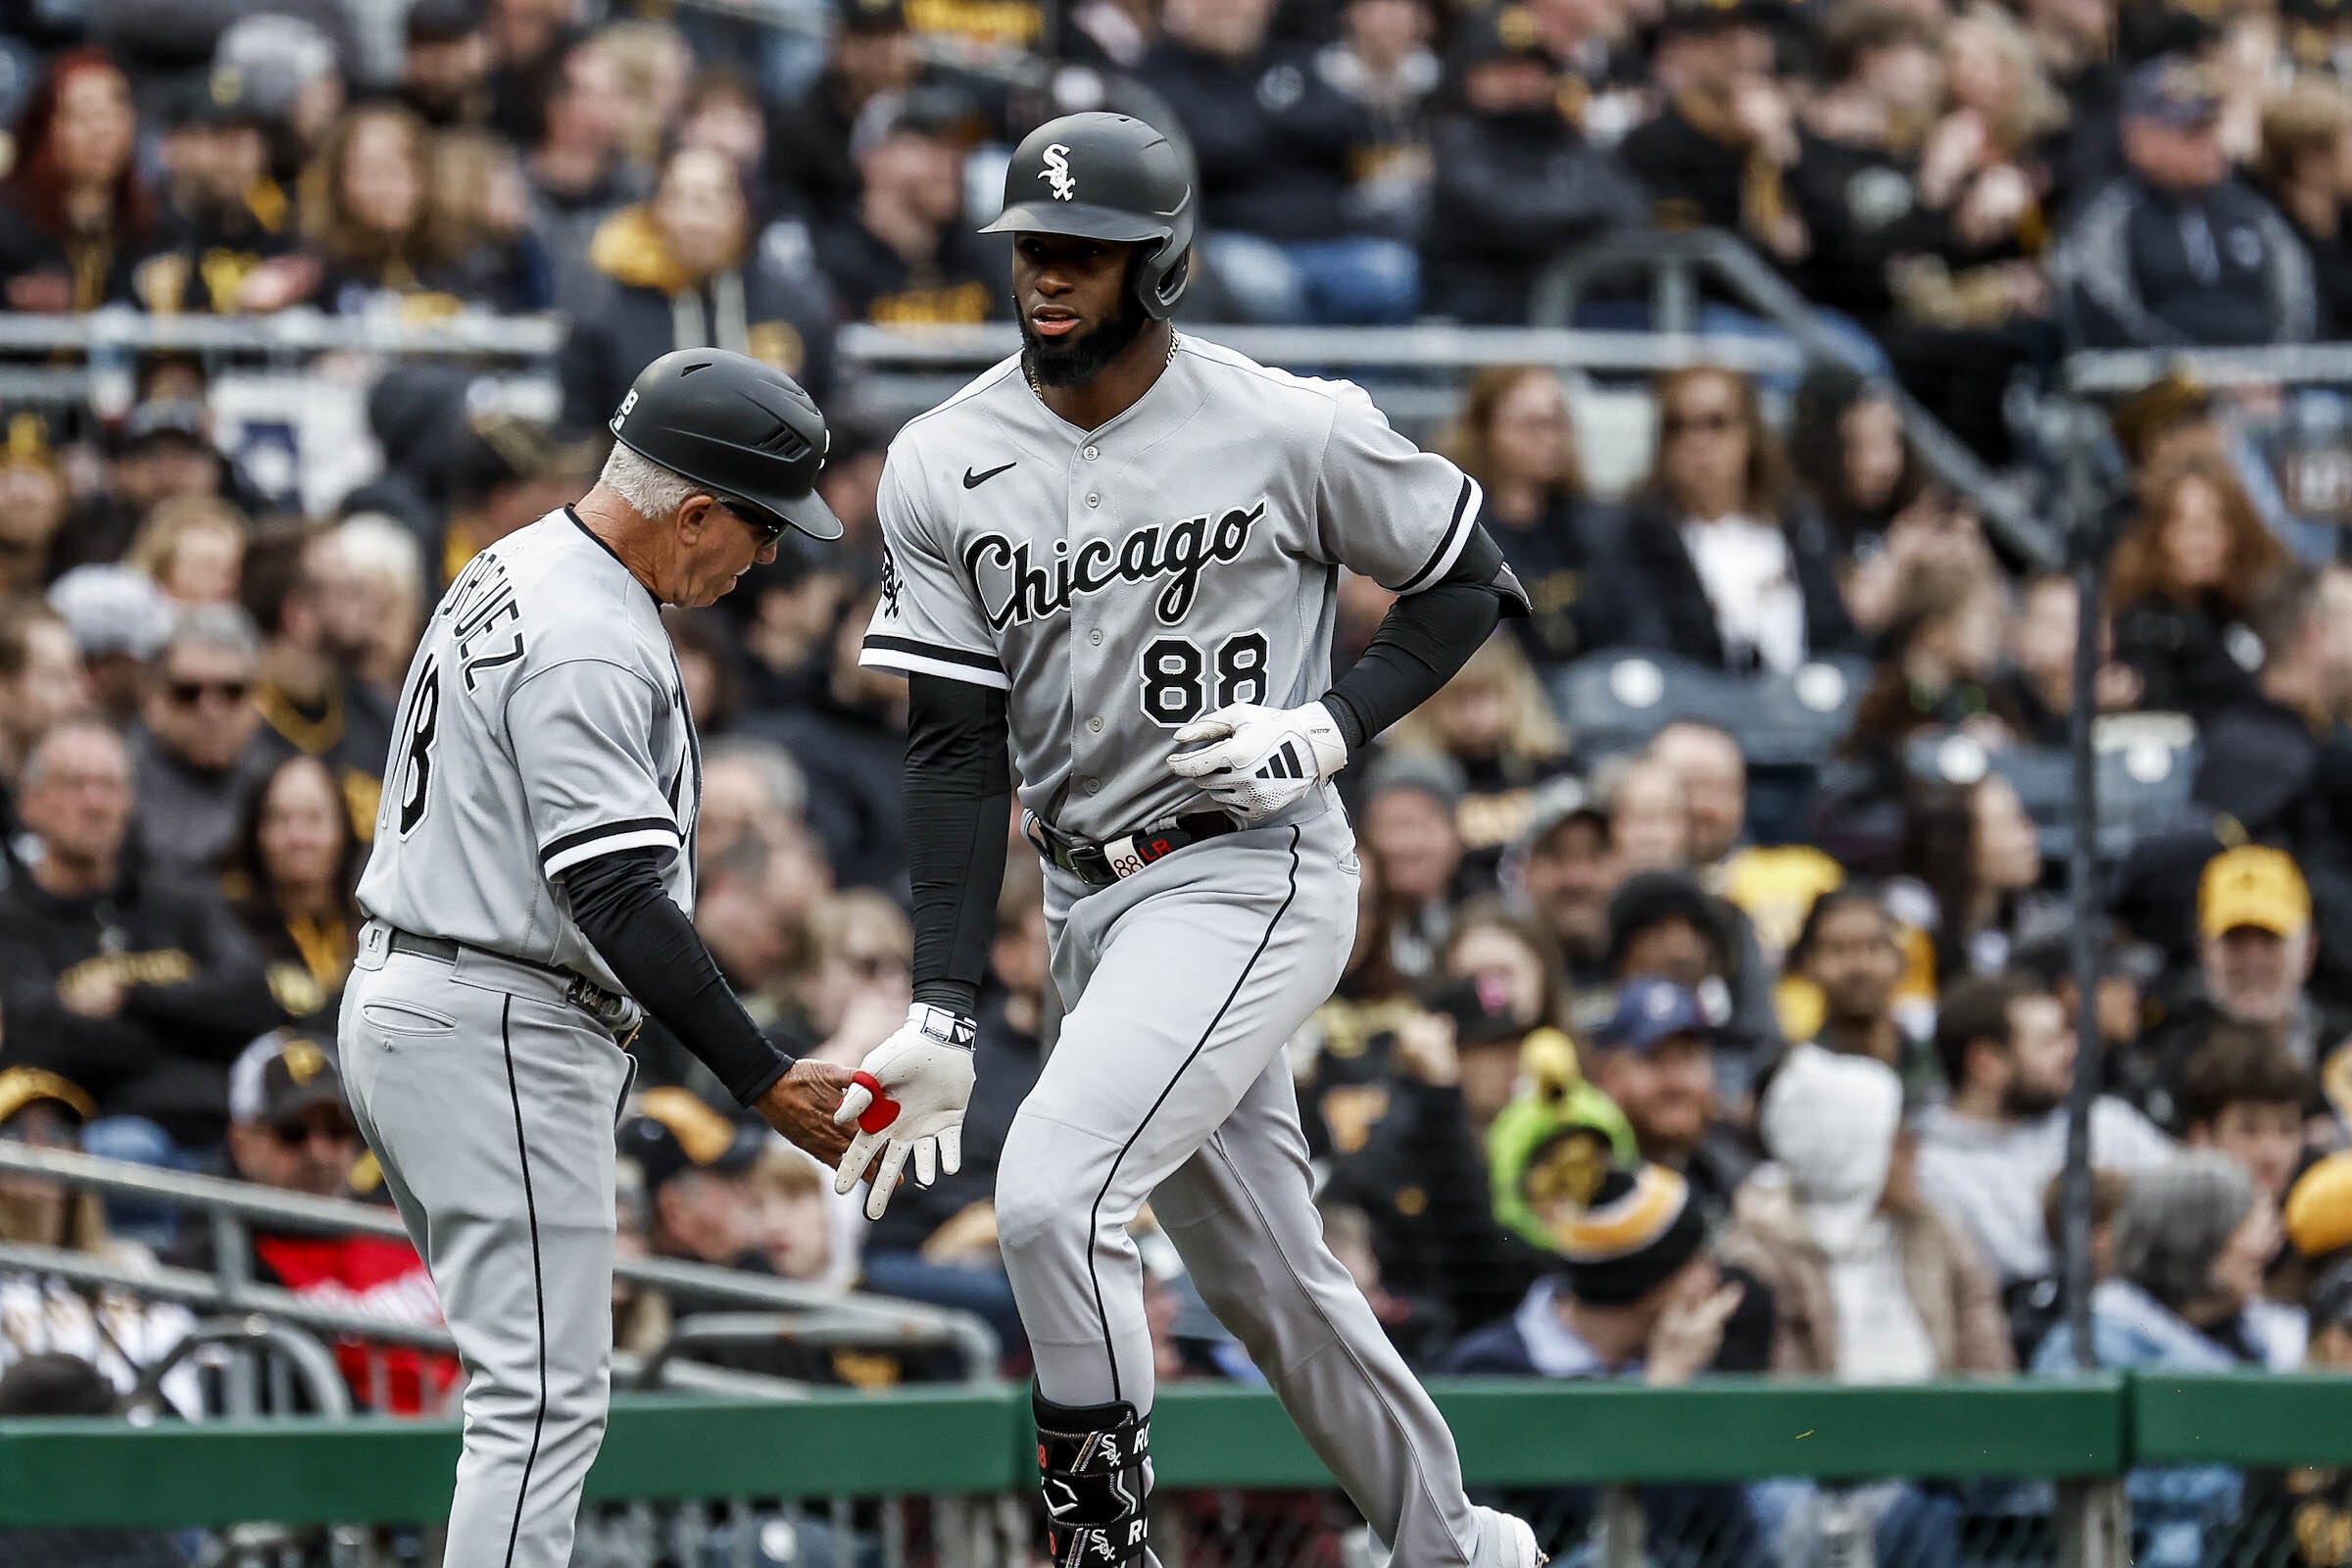 Jake Burger and Luis Robert Jr. Power the Chicago White Sox Over Dodgers